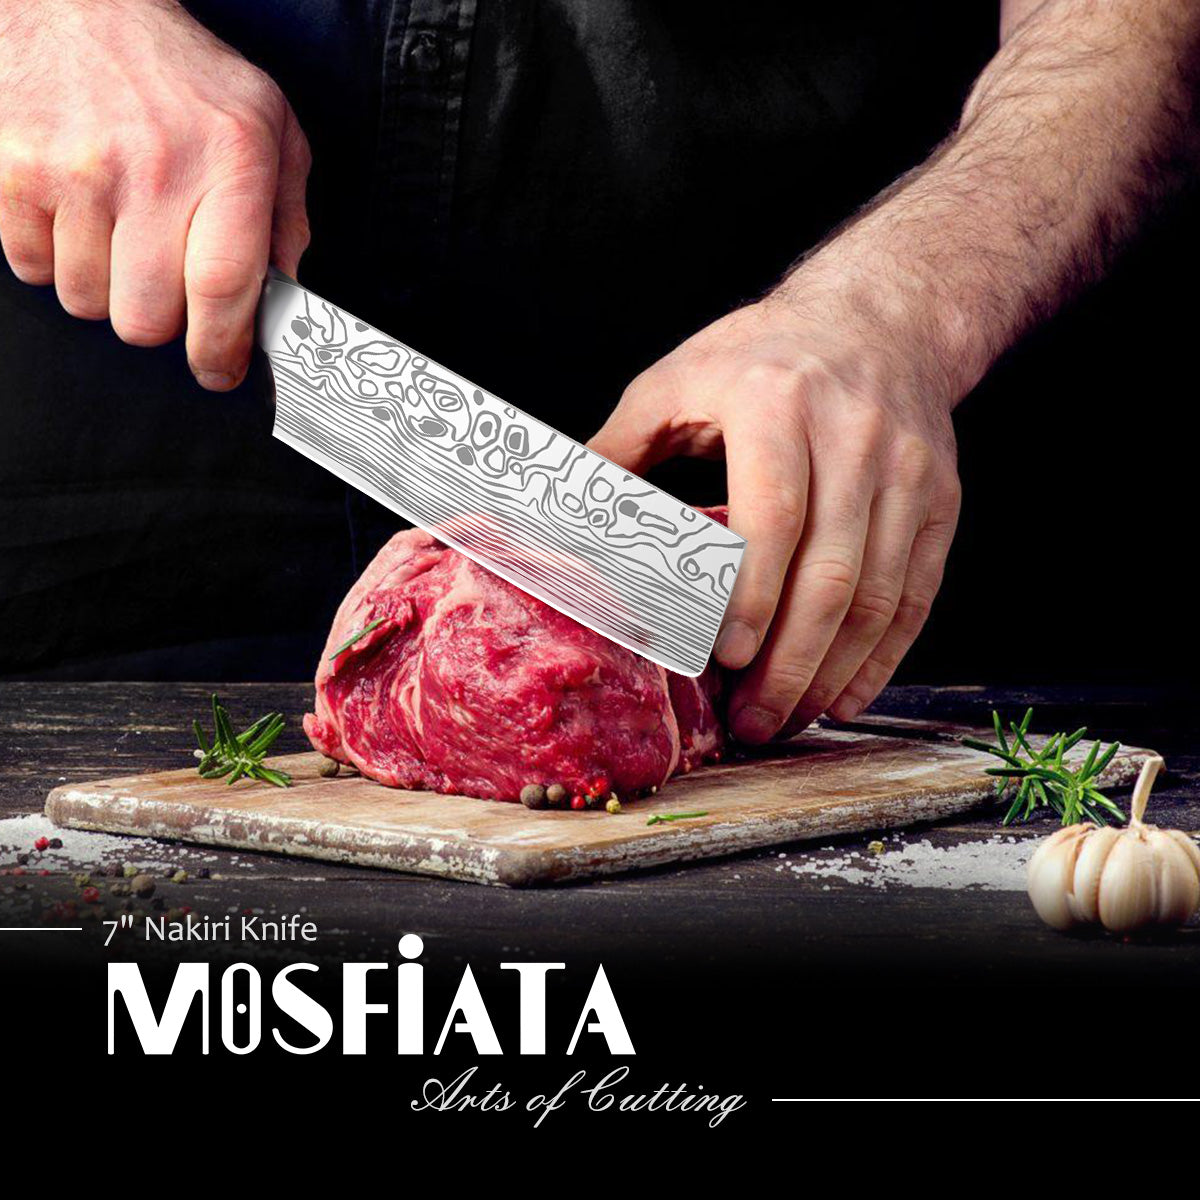 MOSFiATA 8 Super Sharp Professional Chef's Knife with Finger Guard and  Knife Sharpener, German High Carbon Stainless Steel EN1.4116 with Micarta